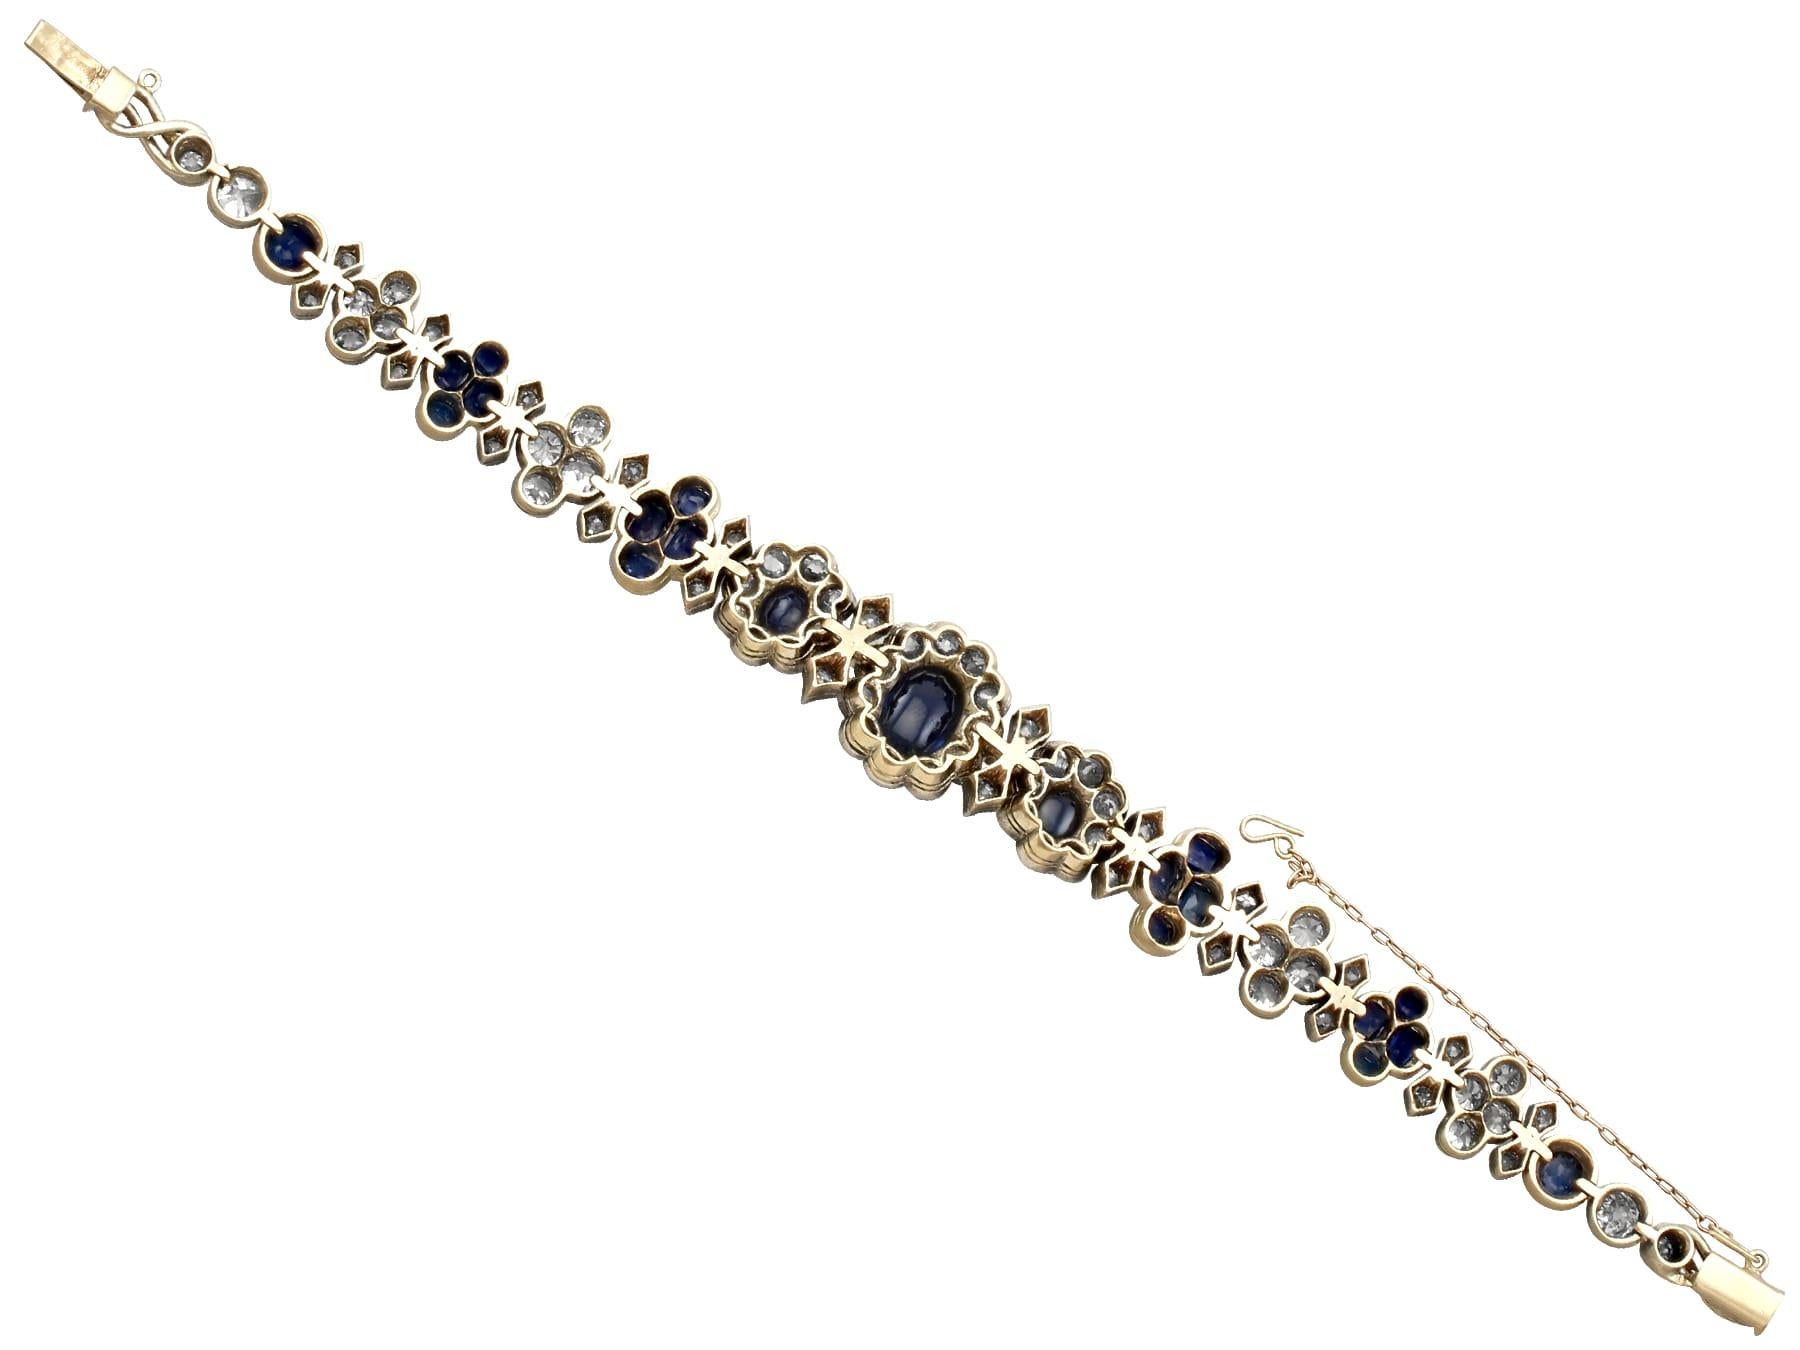 Oval Cut Antique 1910s French 6.72ct Cabochon Cut Sapphire and 7.15ct Diamond Bracelet For Sale